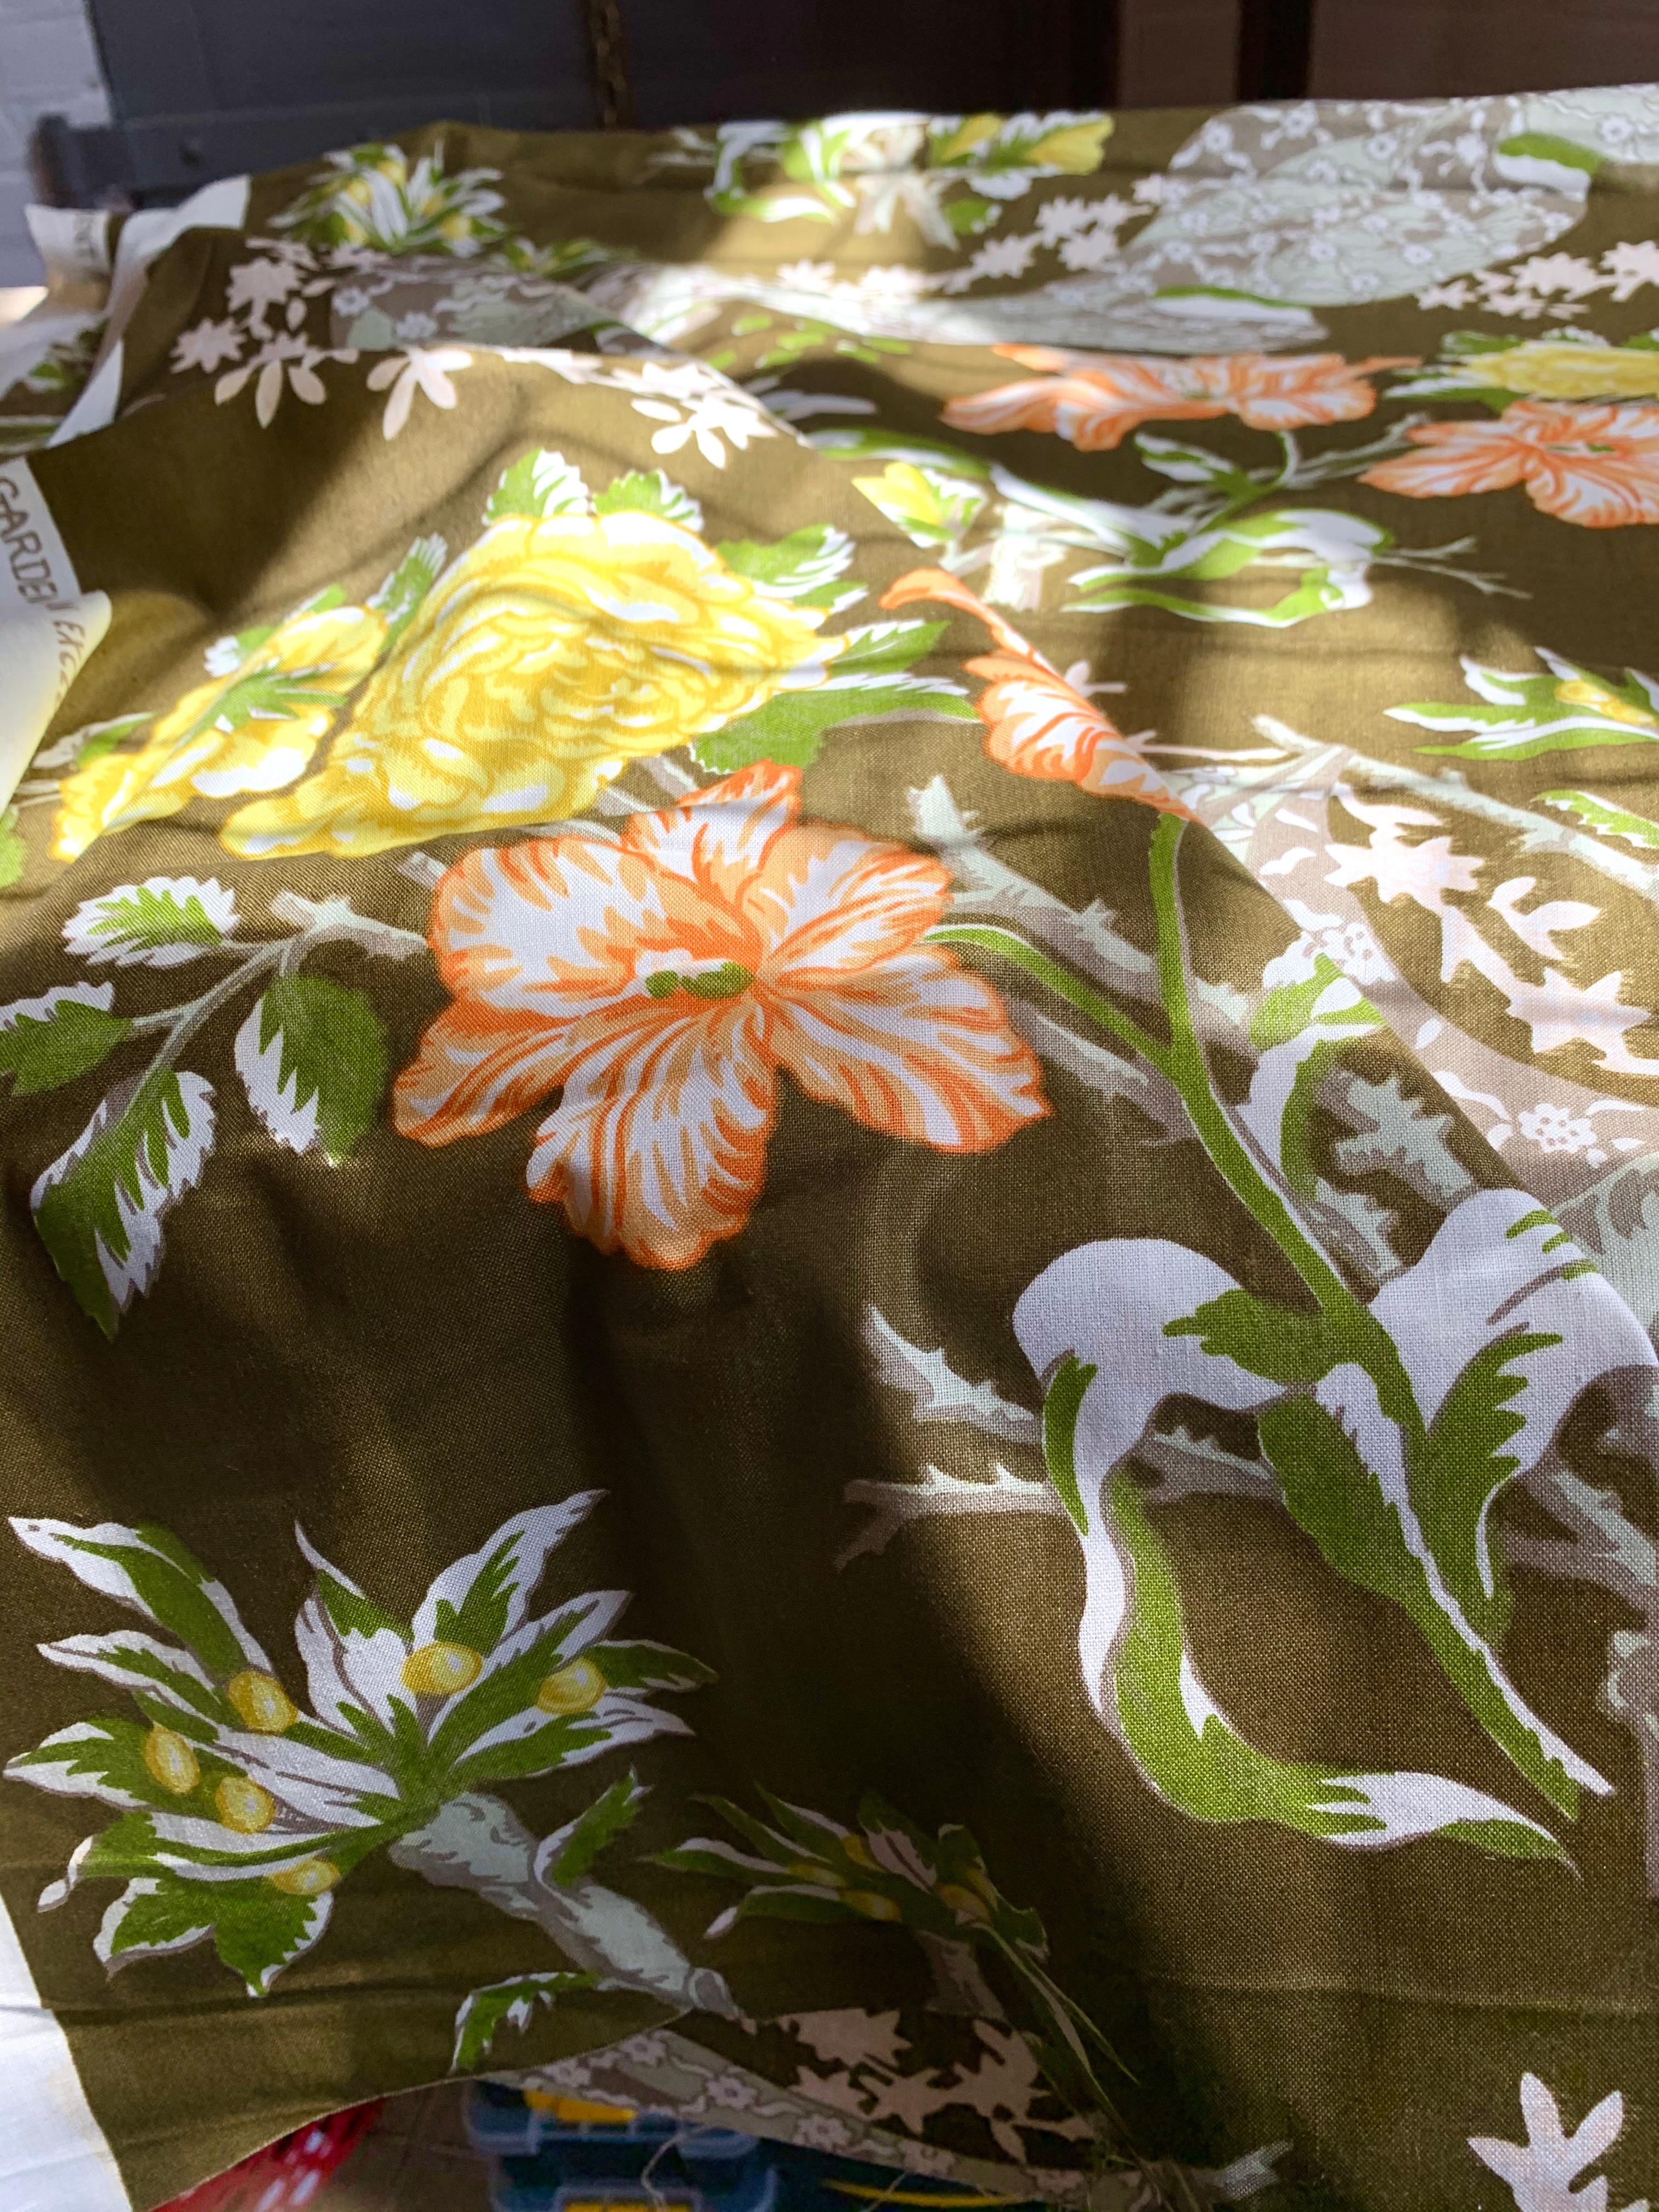 Moss Green Floral Trompe L’Oeil Handprinted Linen, Schumacher, Kent Garden, 1971 In Good Condition For Sale In Brooklyn, NY